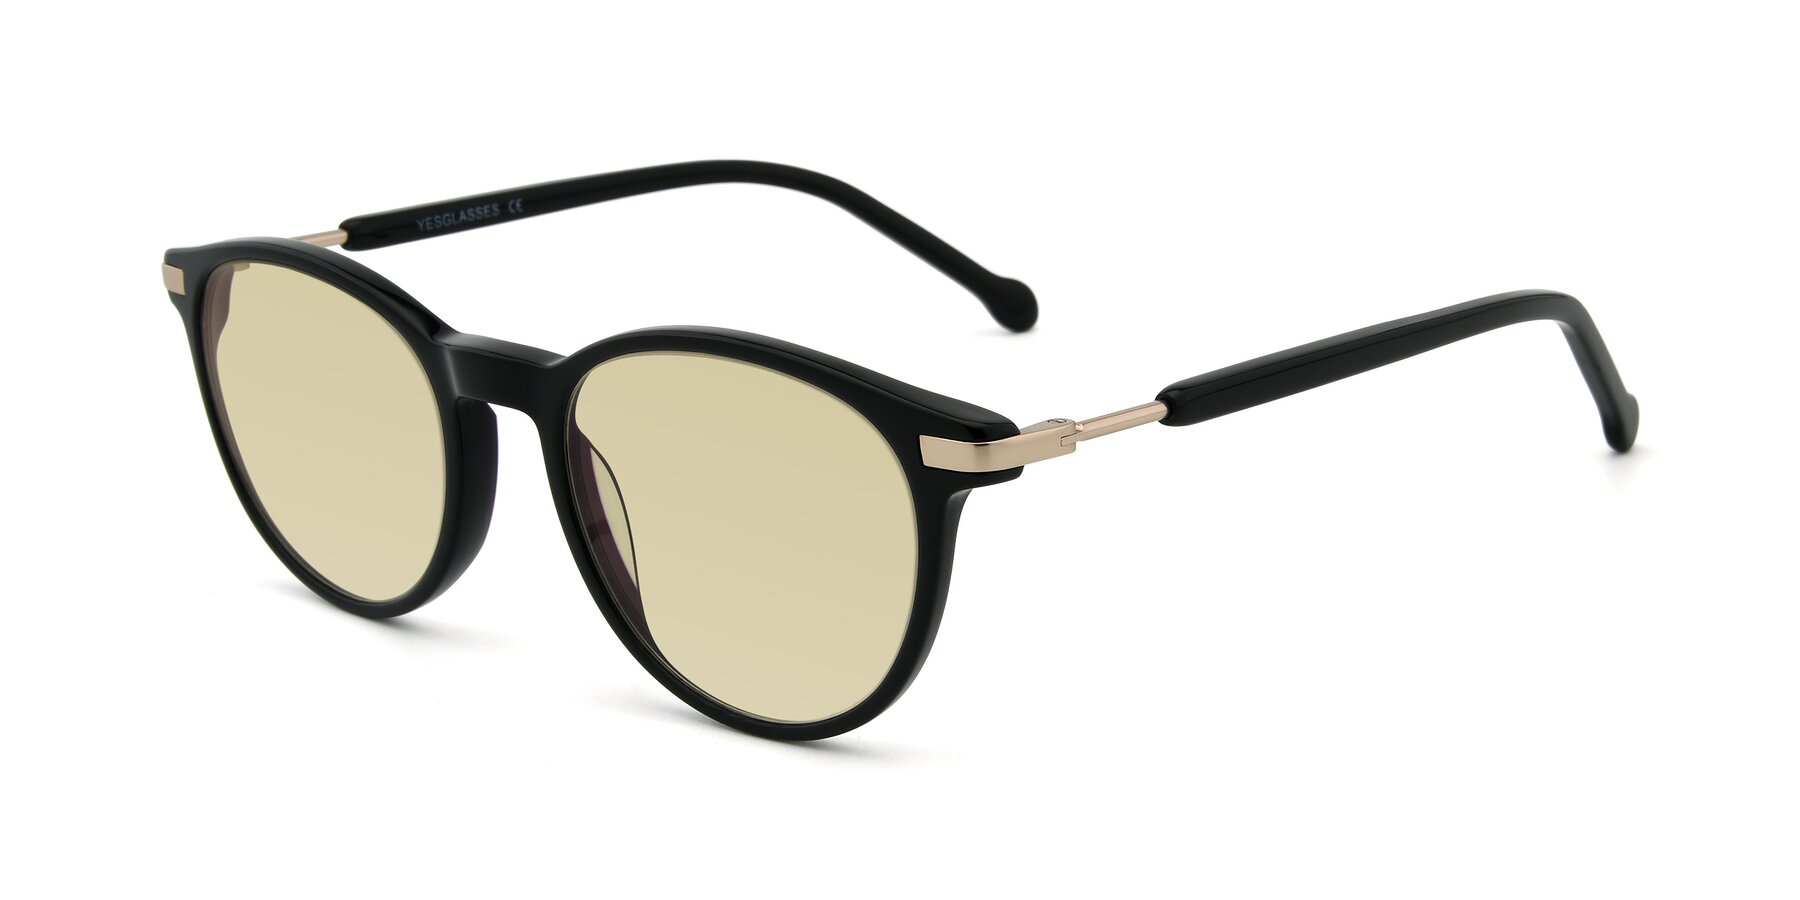 Angle of 17429 in Black with Light Champagne Tinted Lenses